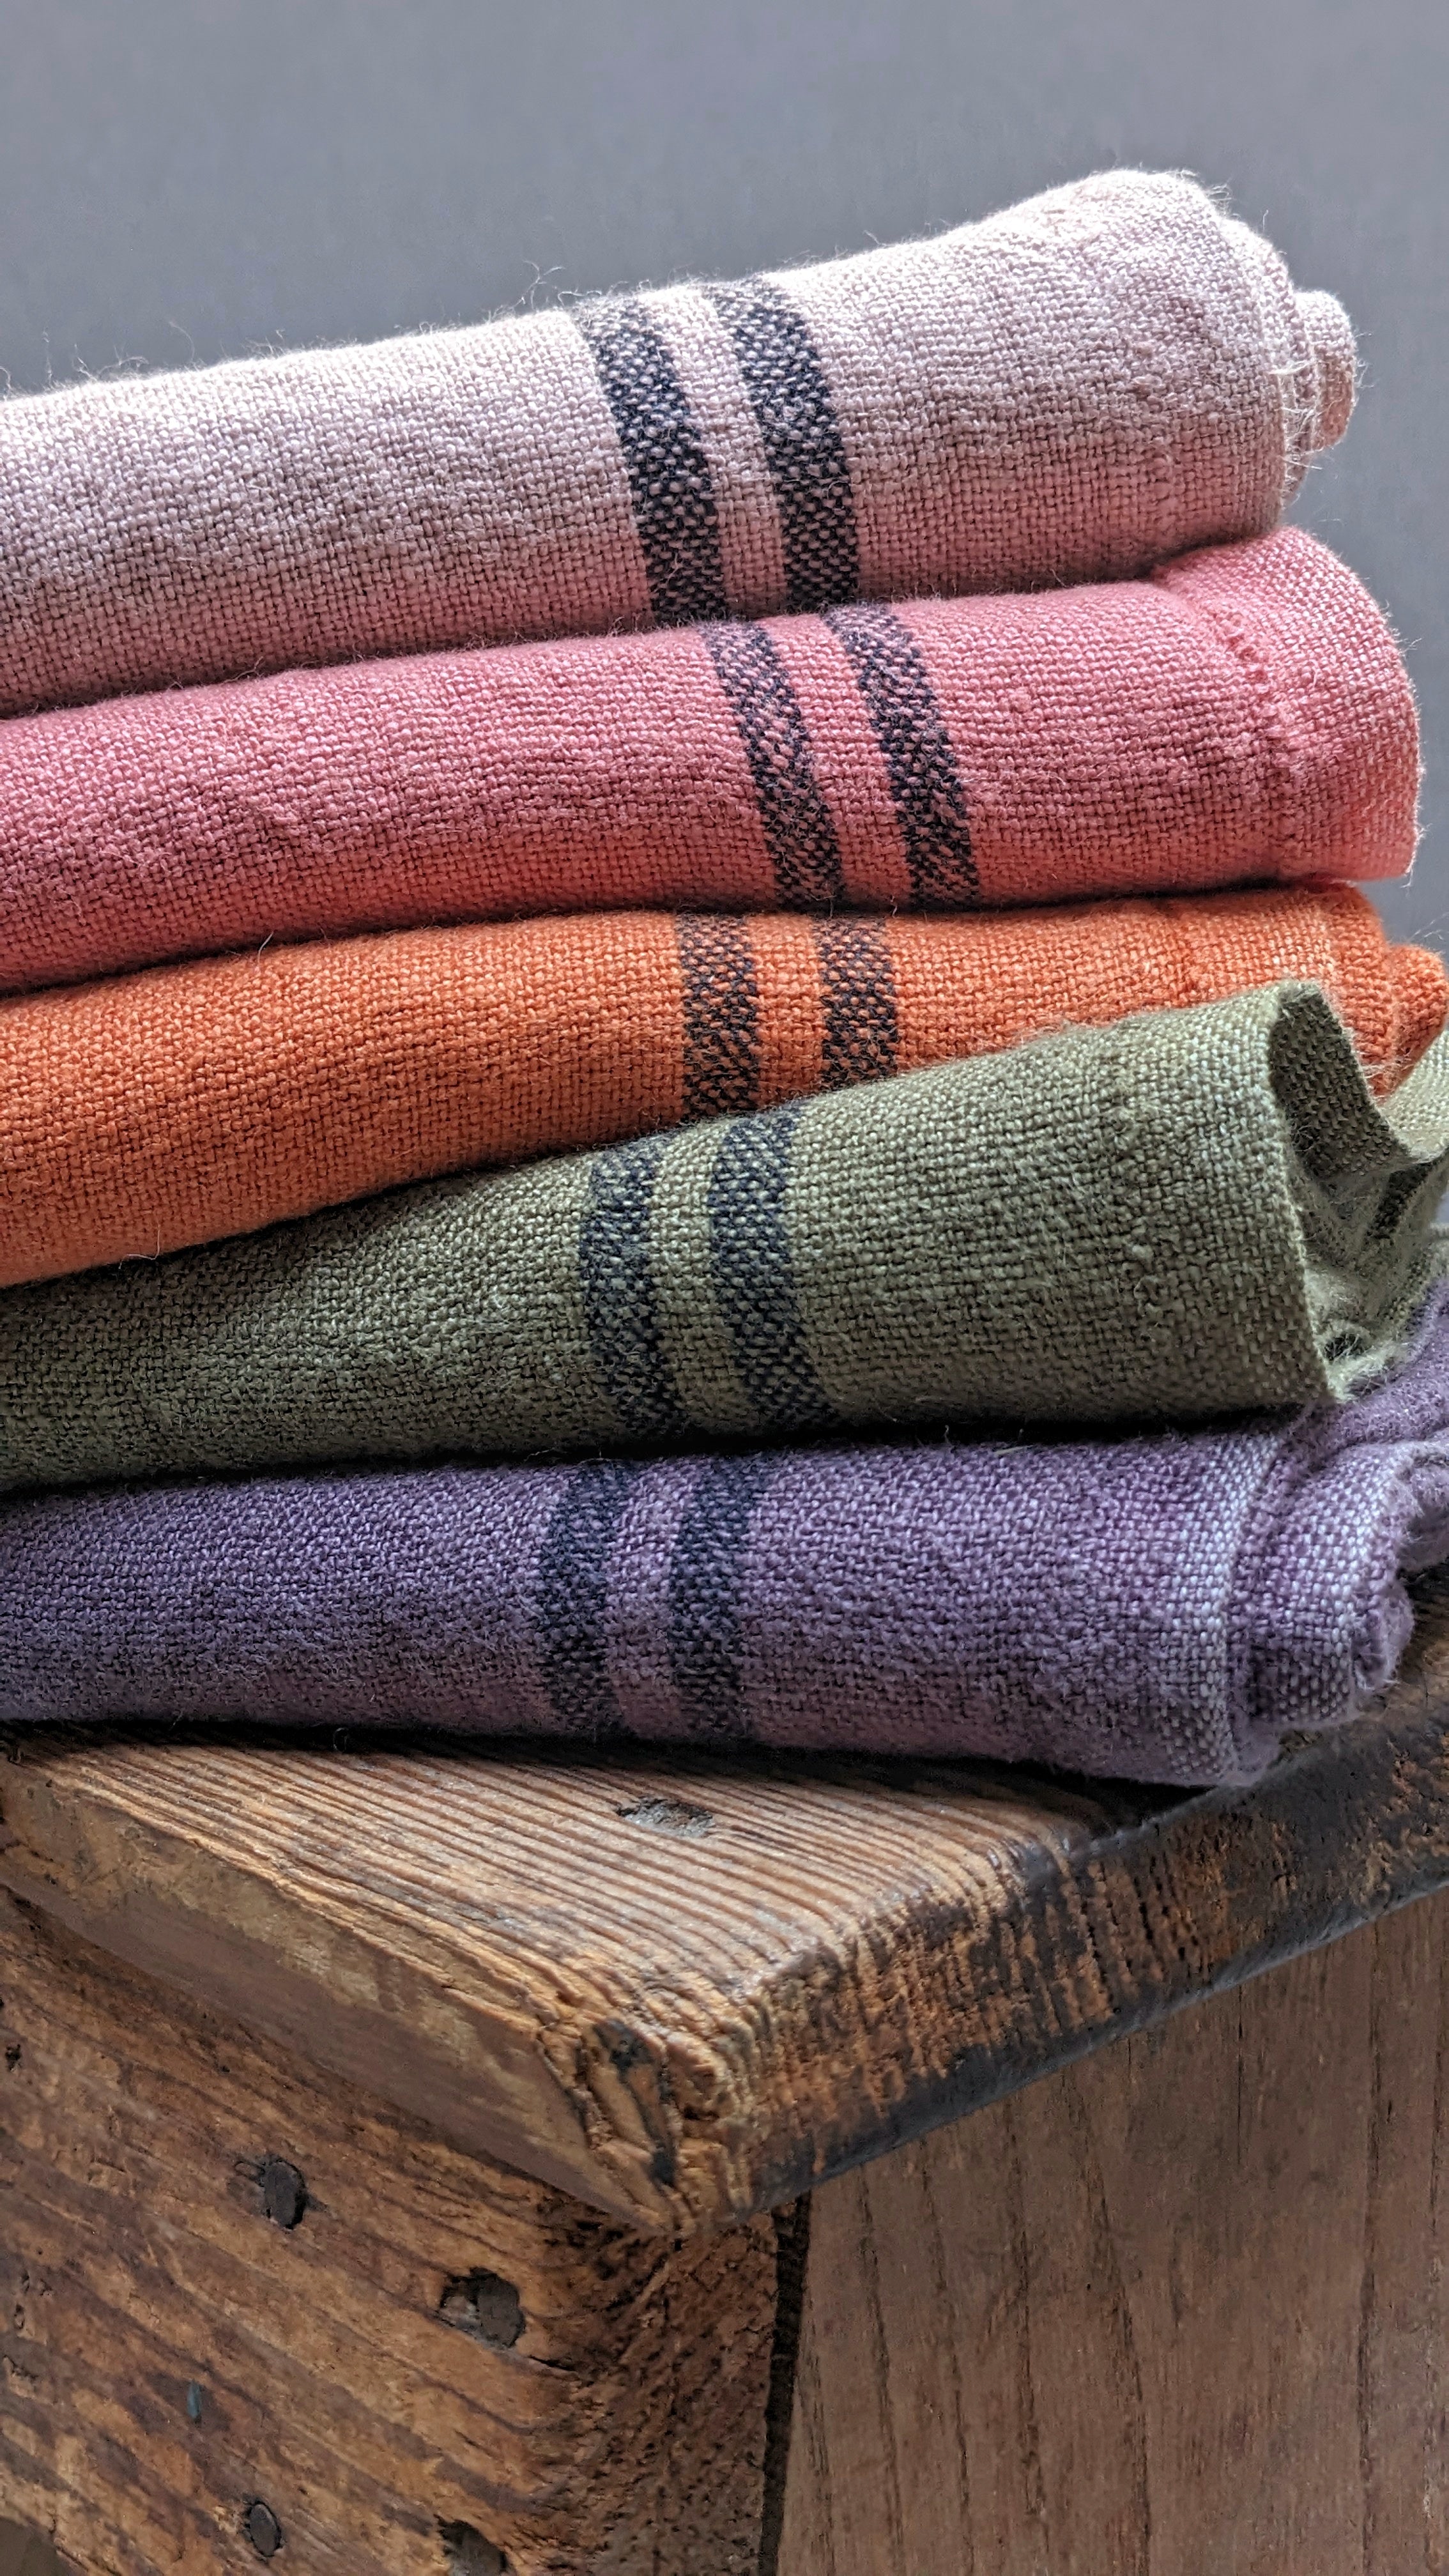 Charvet Editions "Country Washed & Dyed" (Aubergine), Woven linen tea towel. Made in France.